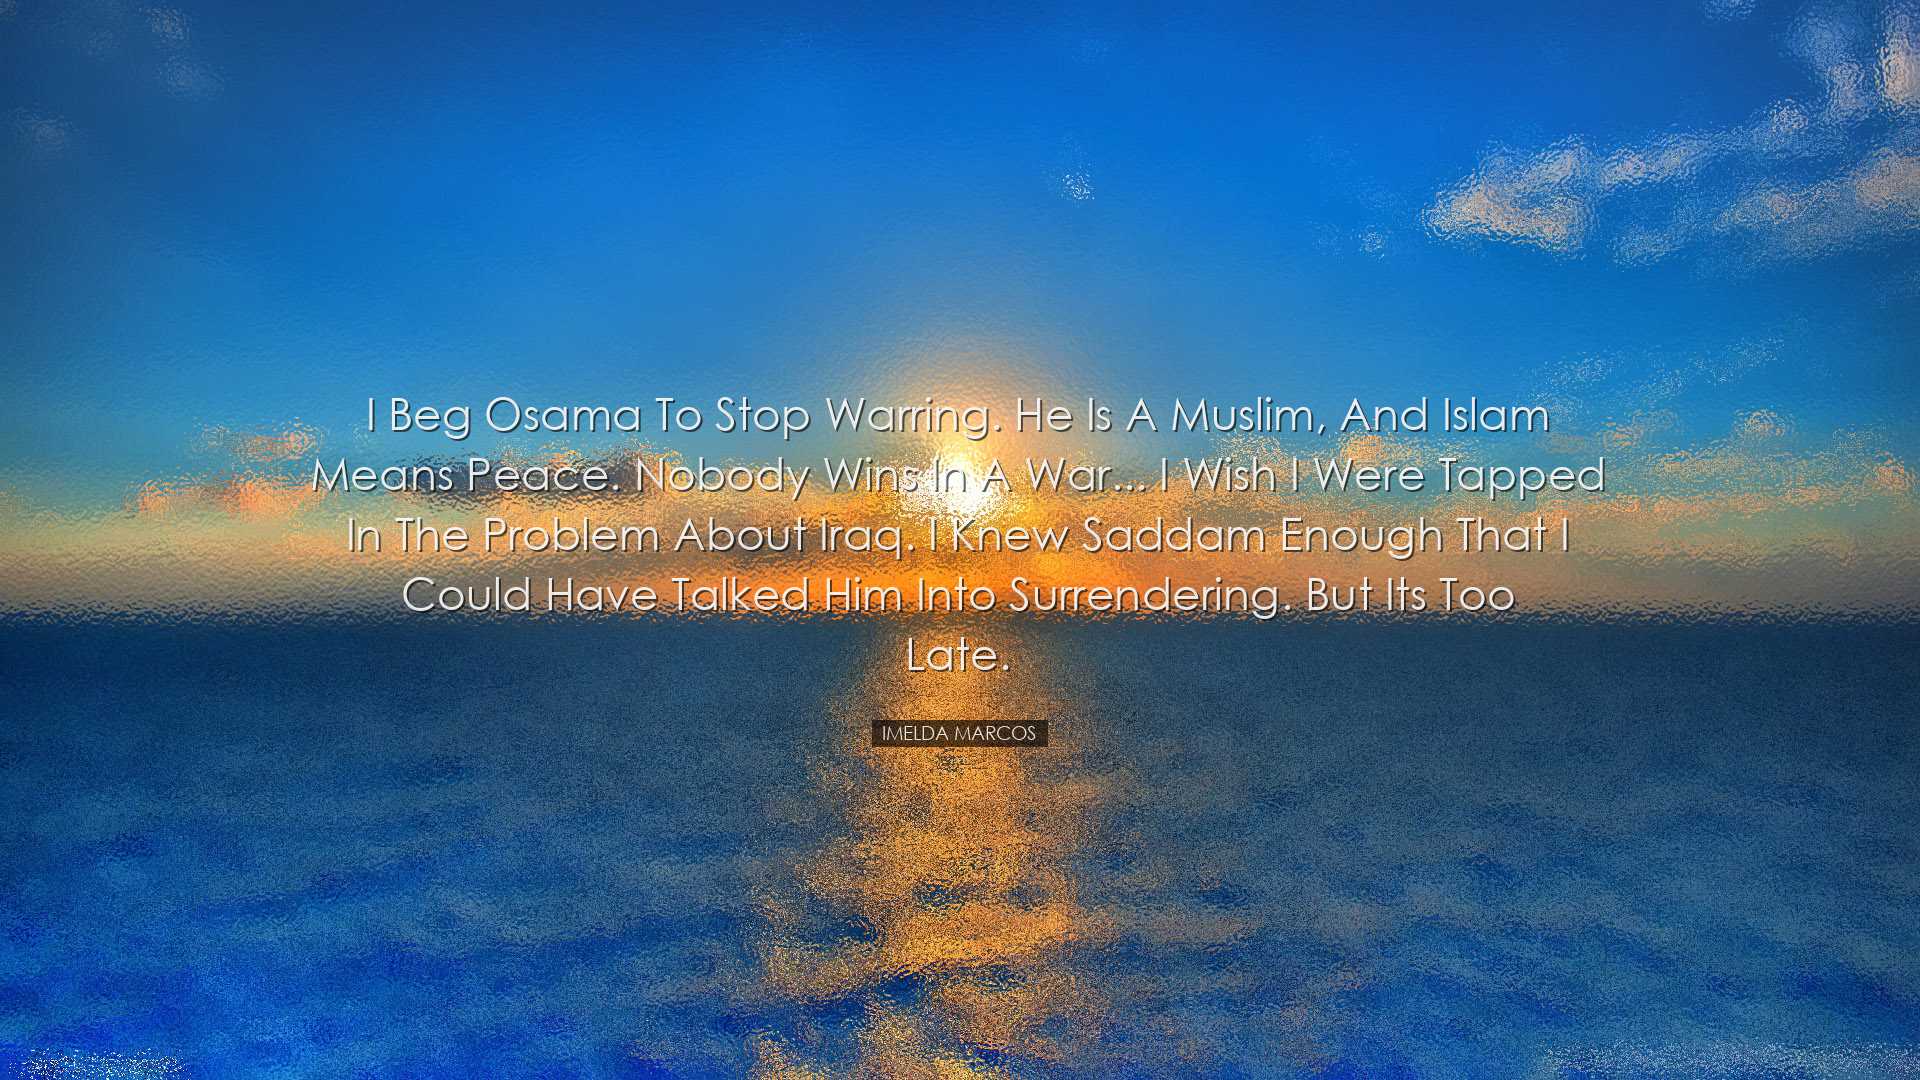 I beg Osama to stop warring. He is a Muslim, and Islam means peace